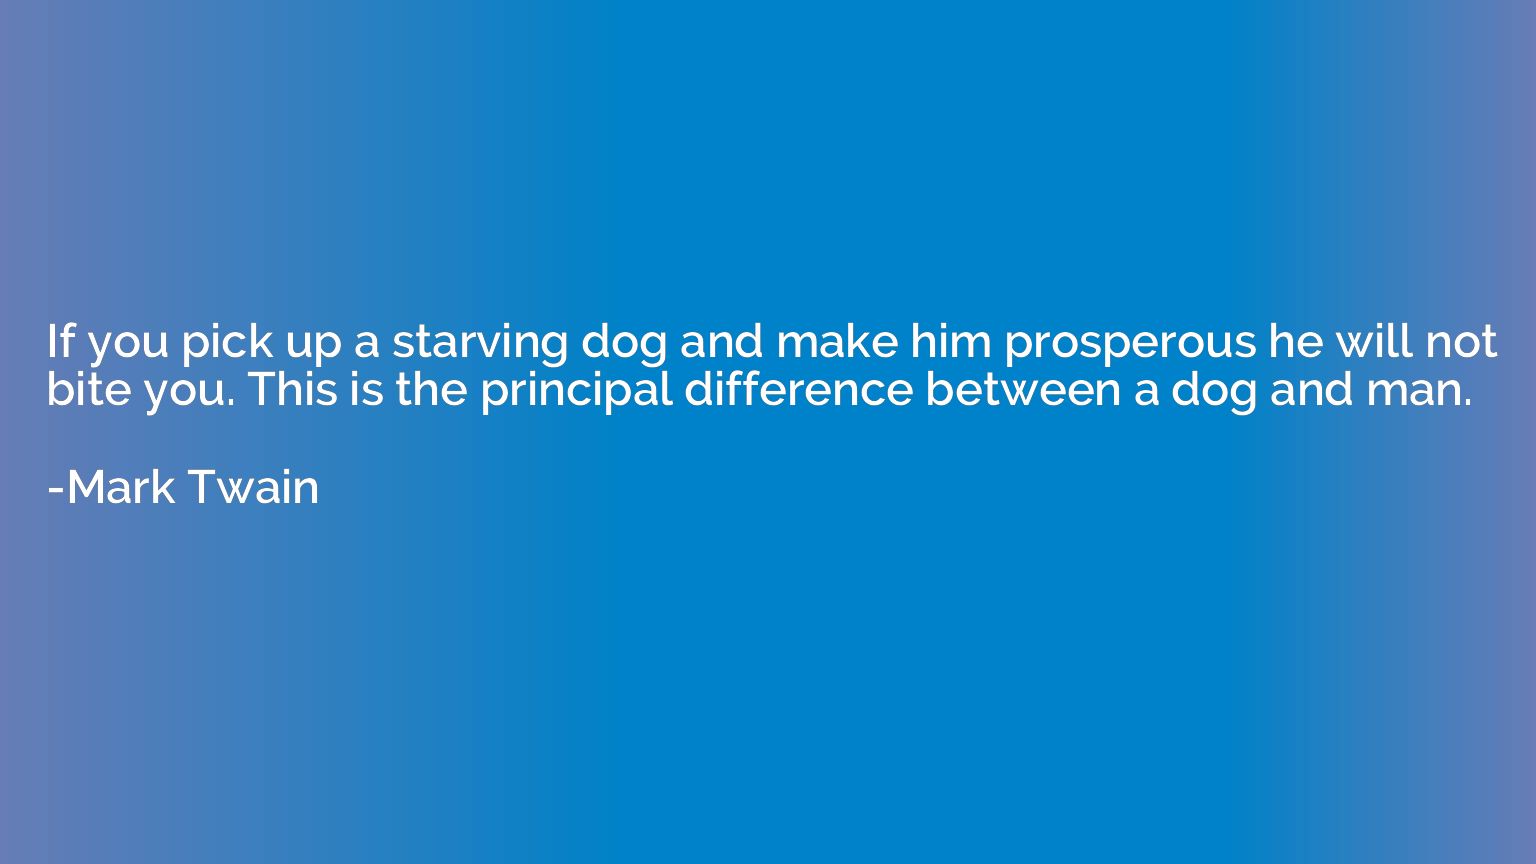 If you pick up a starving dog and make him prosperous he wil